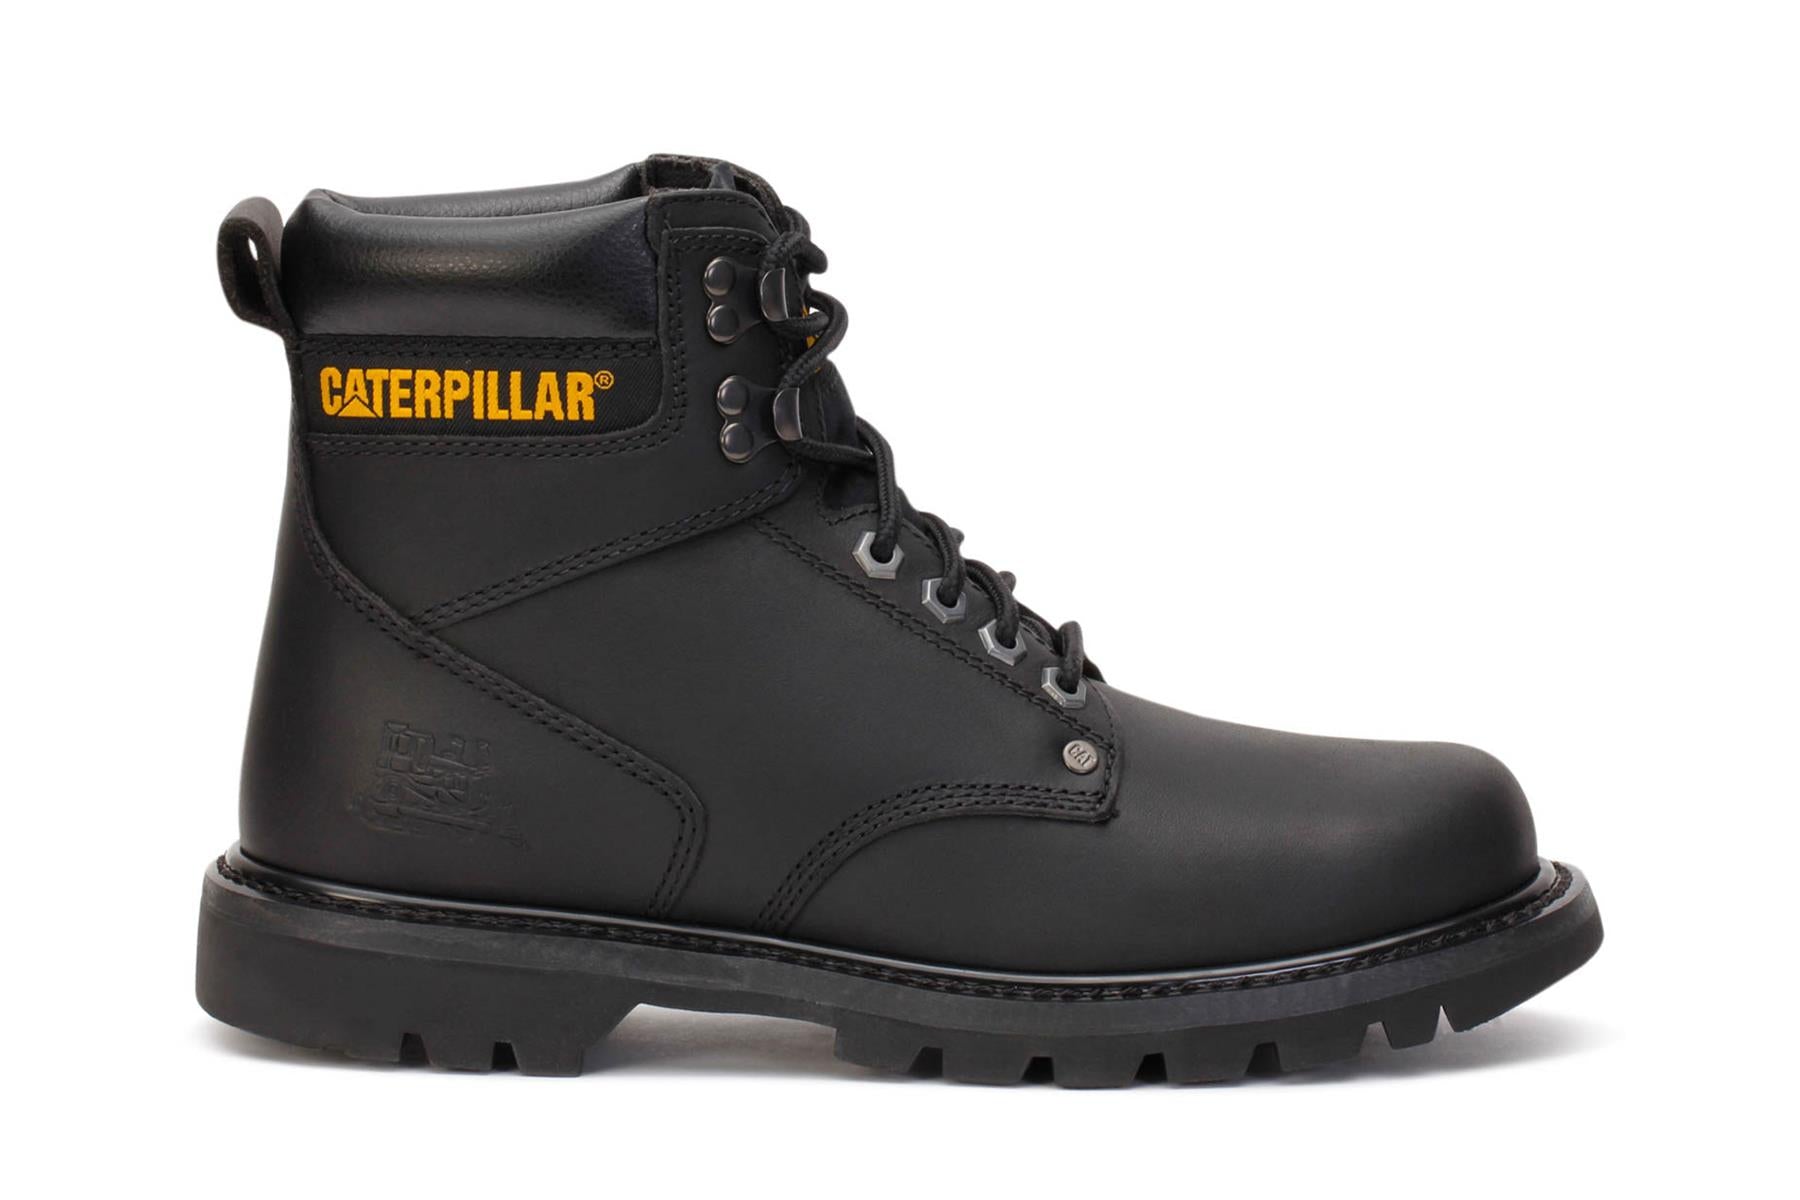 caterpillar-mens-work-boots-second-shift-black-leather-p70043-main